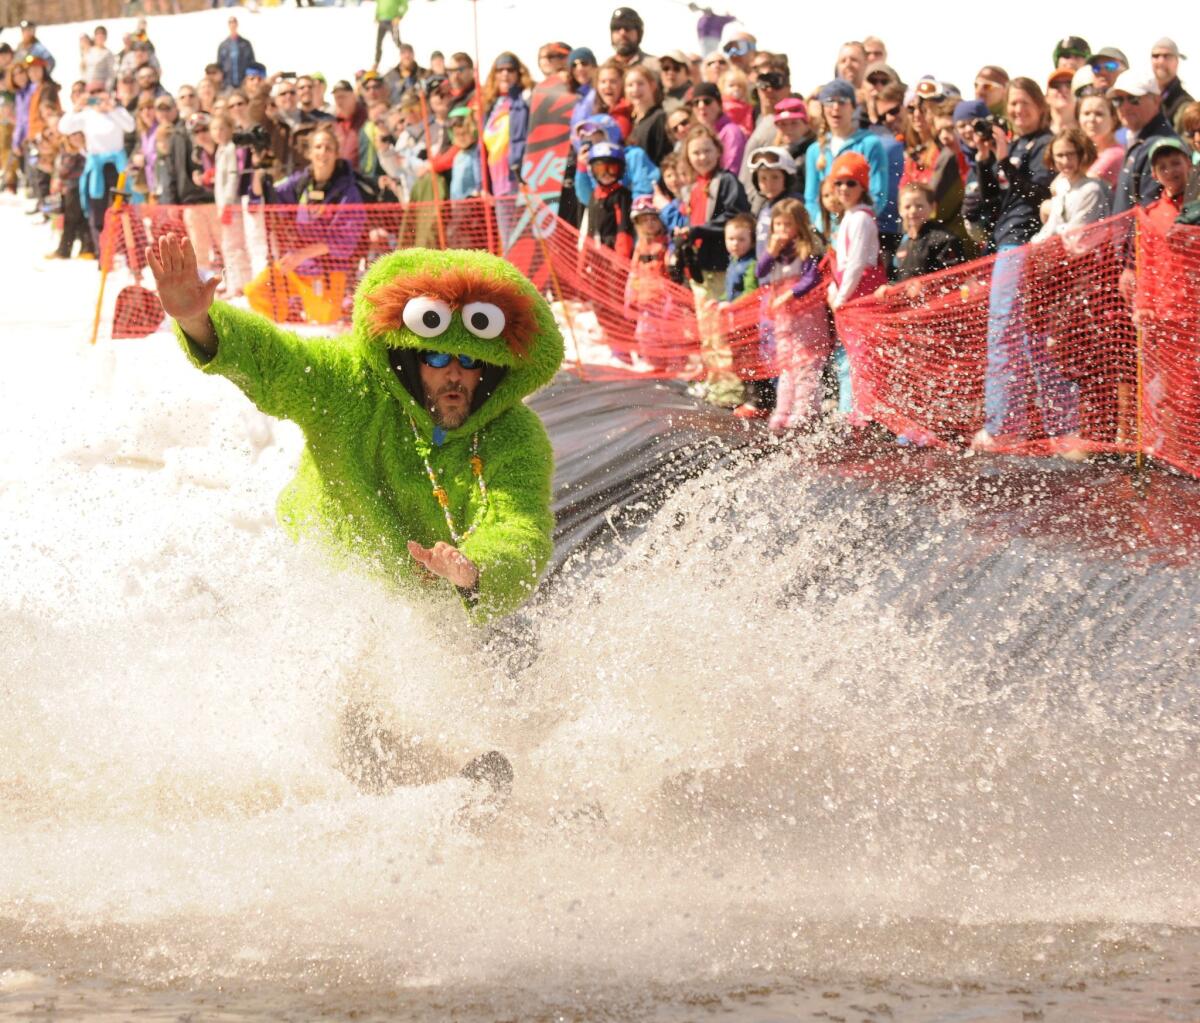 A pond skimmer dressed as Oscar the Grouch makes a splash while attempting to ski across a man-made pond at the Whiteface Mountain Ski Center in Wilmington, N.Y., in mid-April.